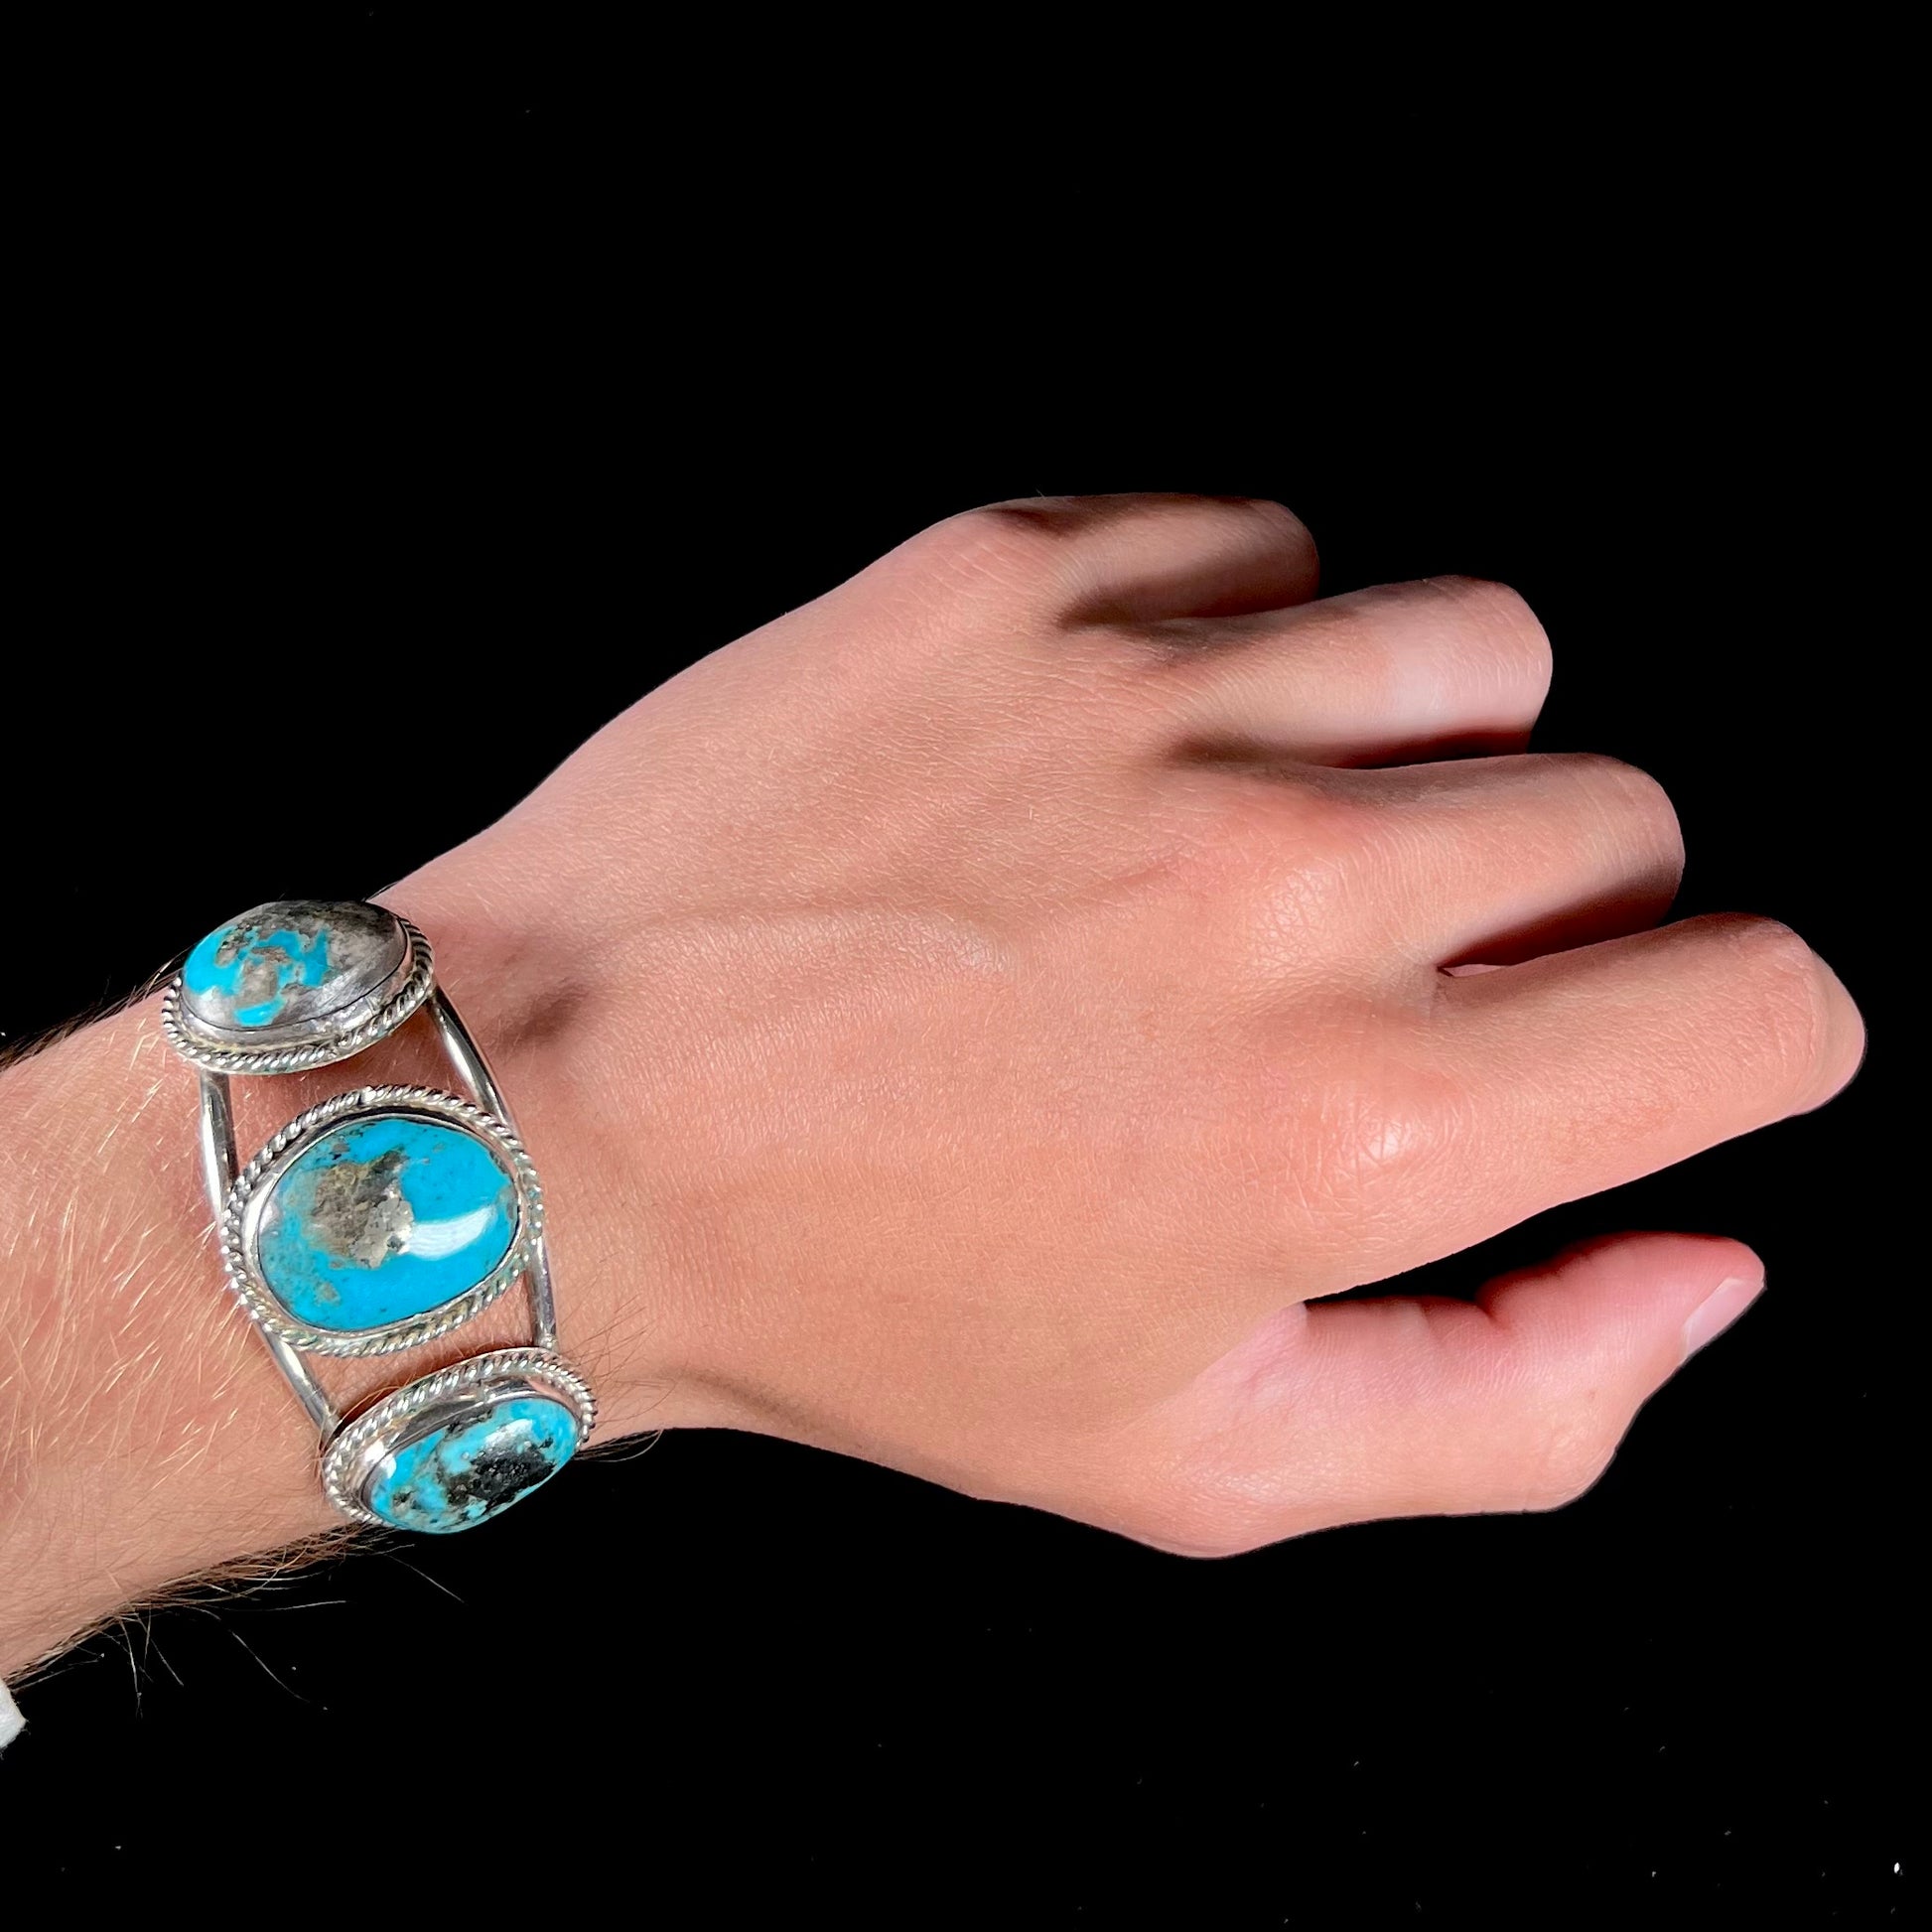 A ladies' three stone silver cuff bracelet accented with rope bezels and set with Morenci turquoise.